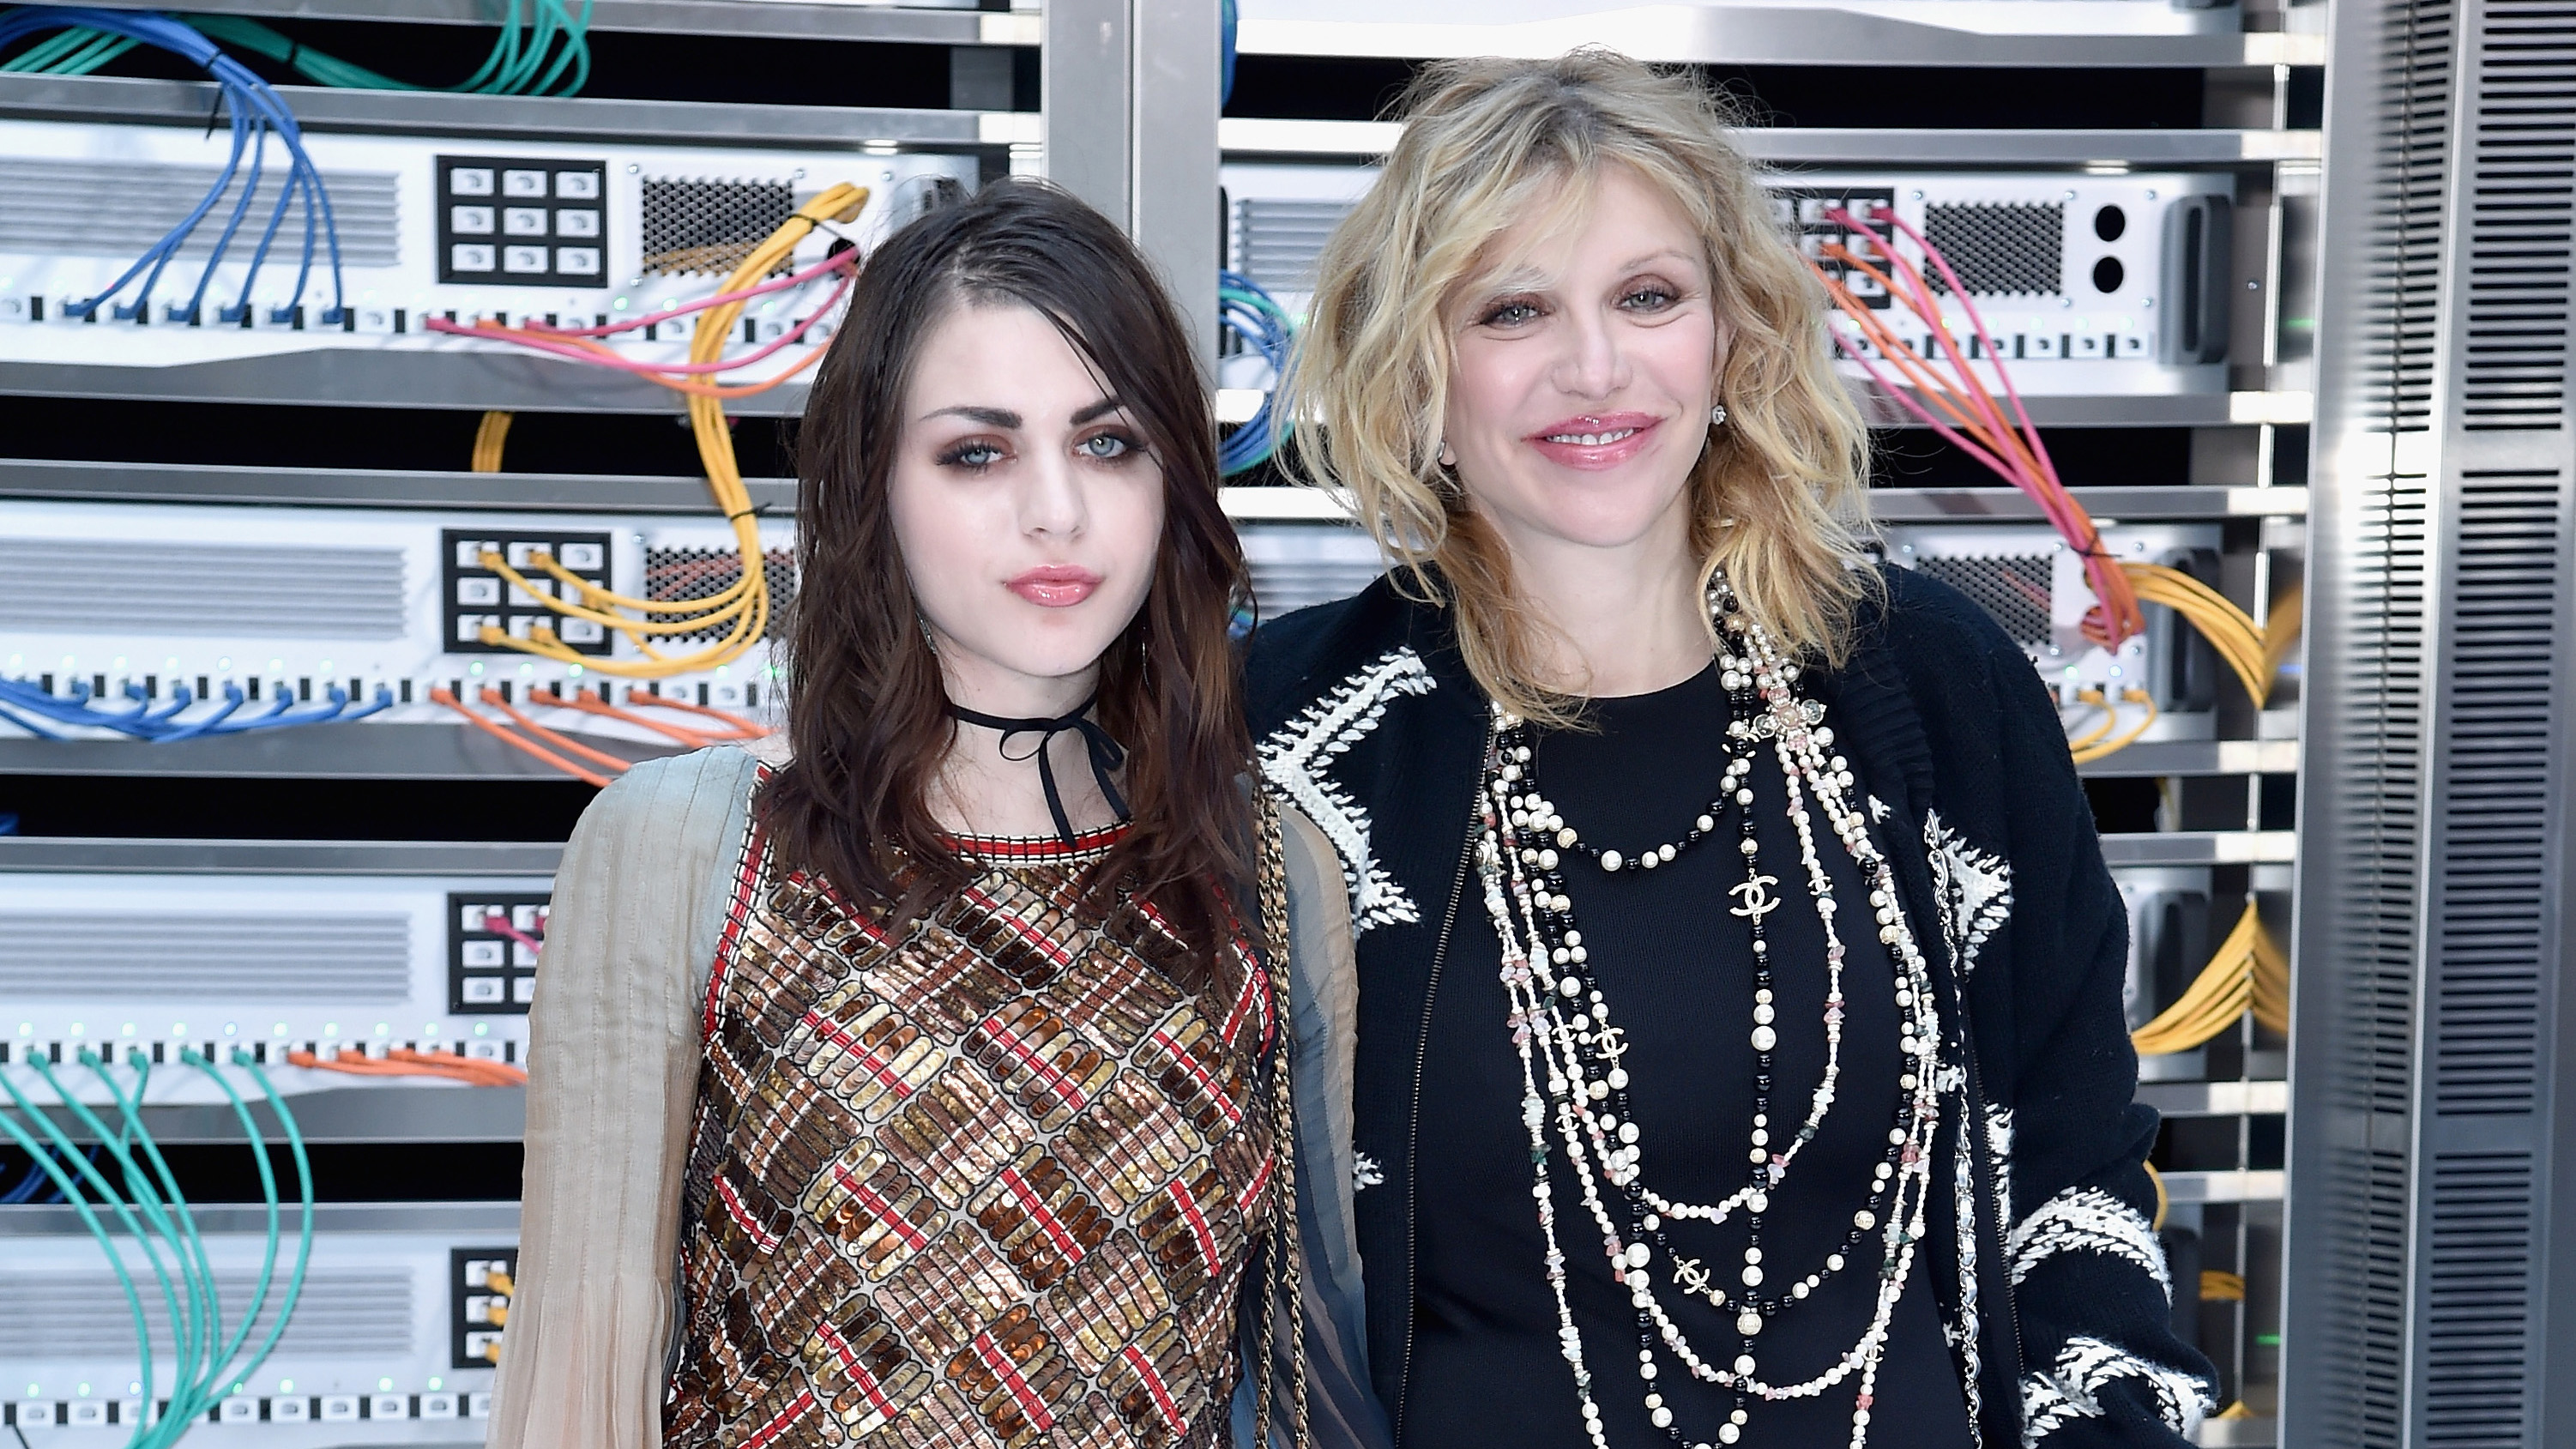 Courtney Love and Frances Bean Cobain Have Another Major Mother